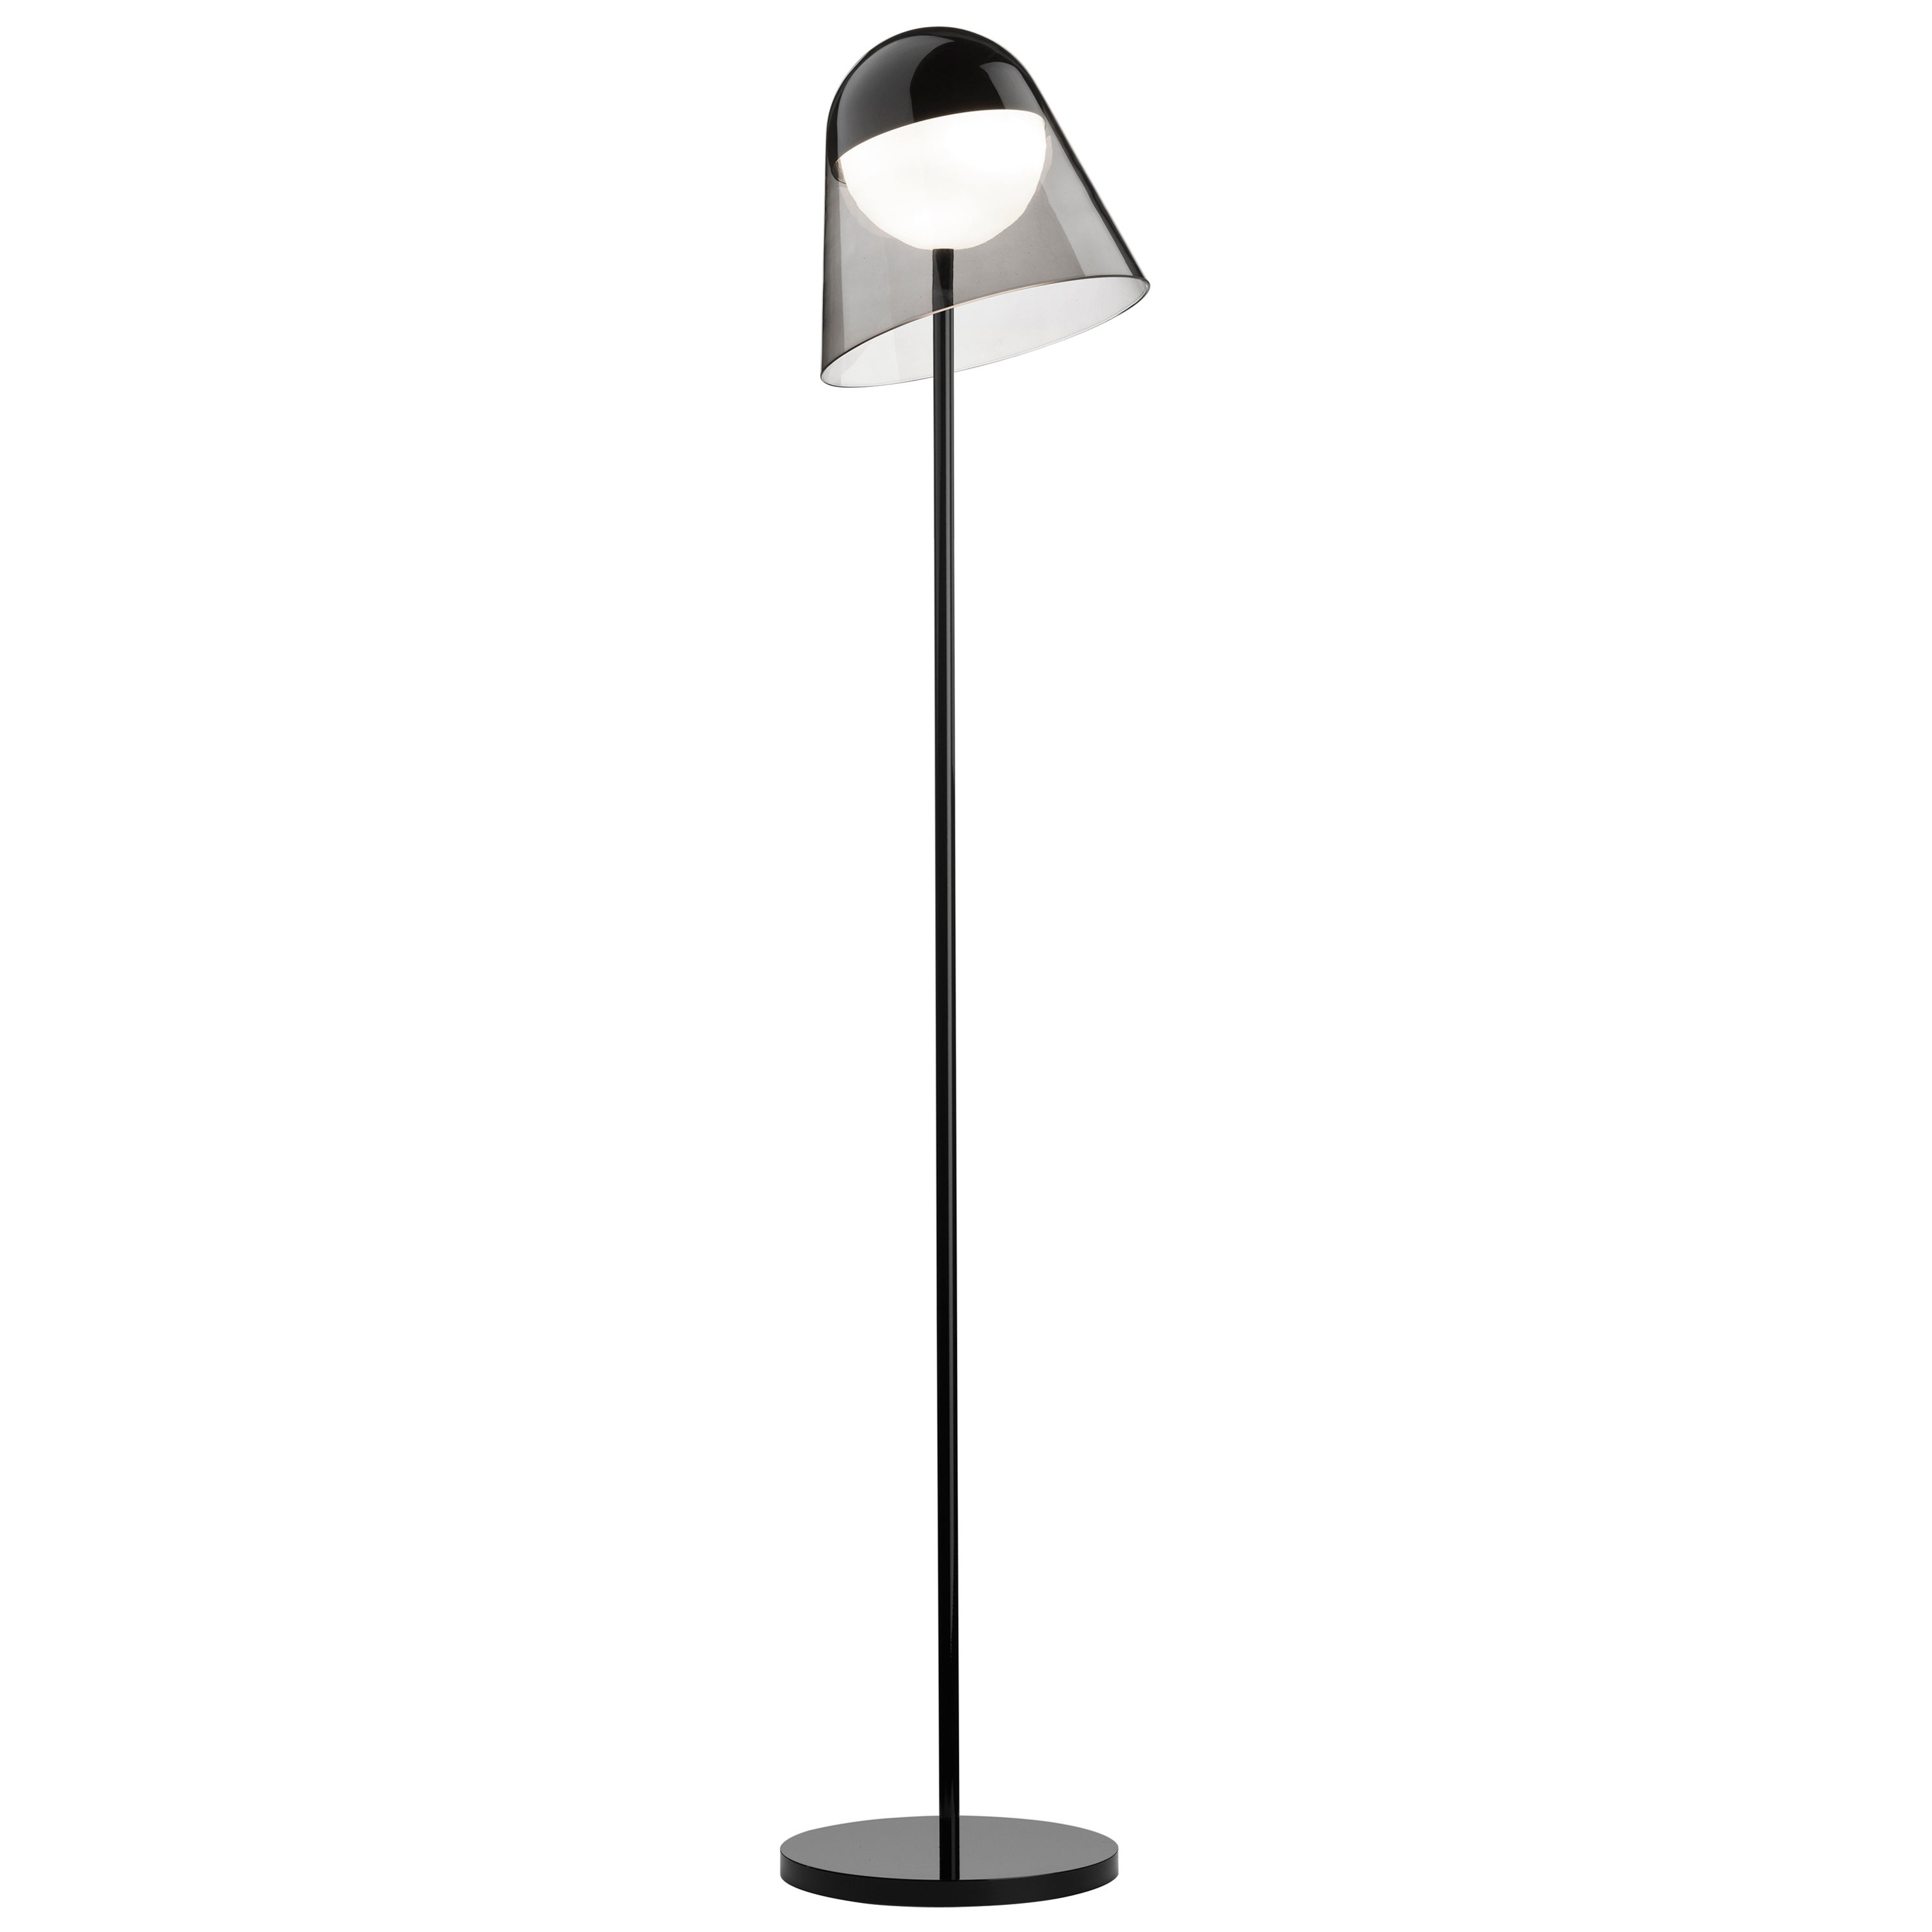 Helios Floor Lamp, Smoked Glass and Black Structure, Made in Italy